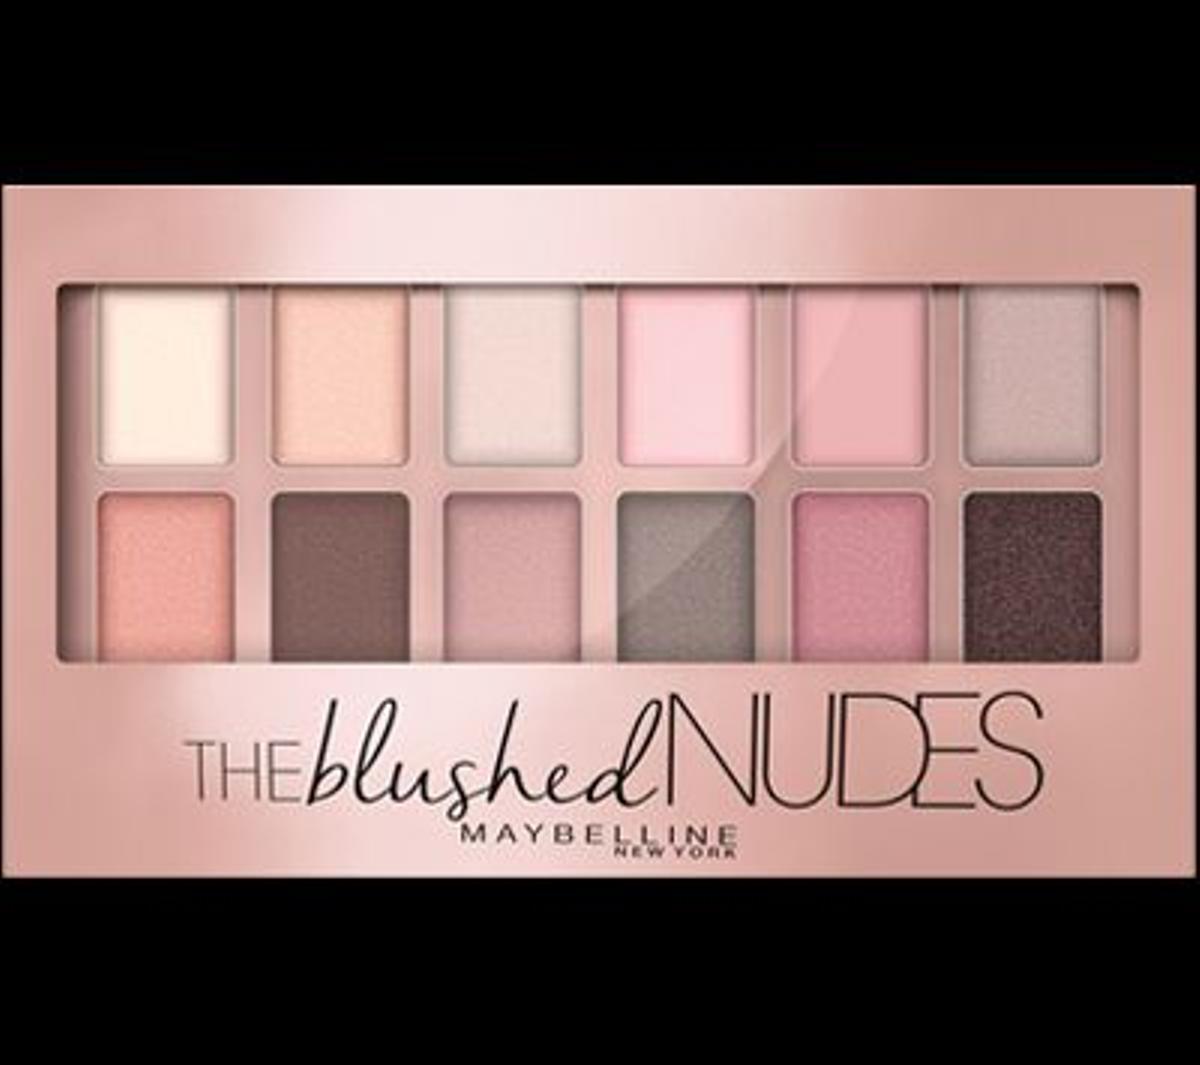 The Blushed Nudes, Maybelline